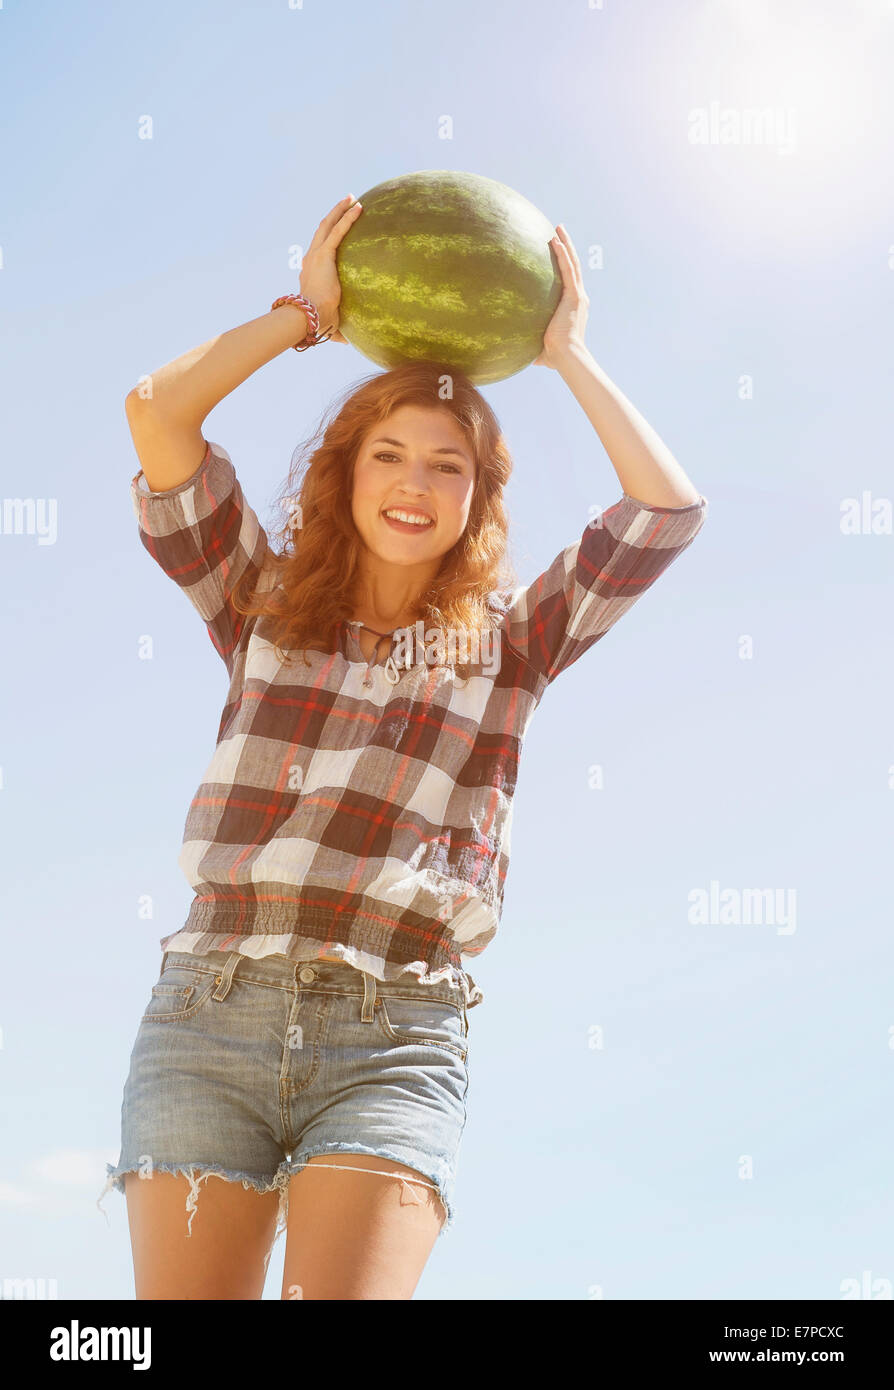 Young woman carrying on head watermelon Stock Photo